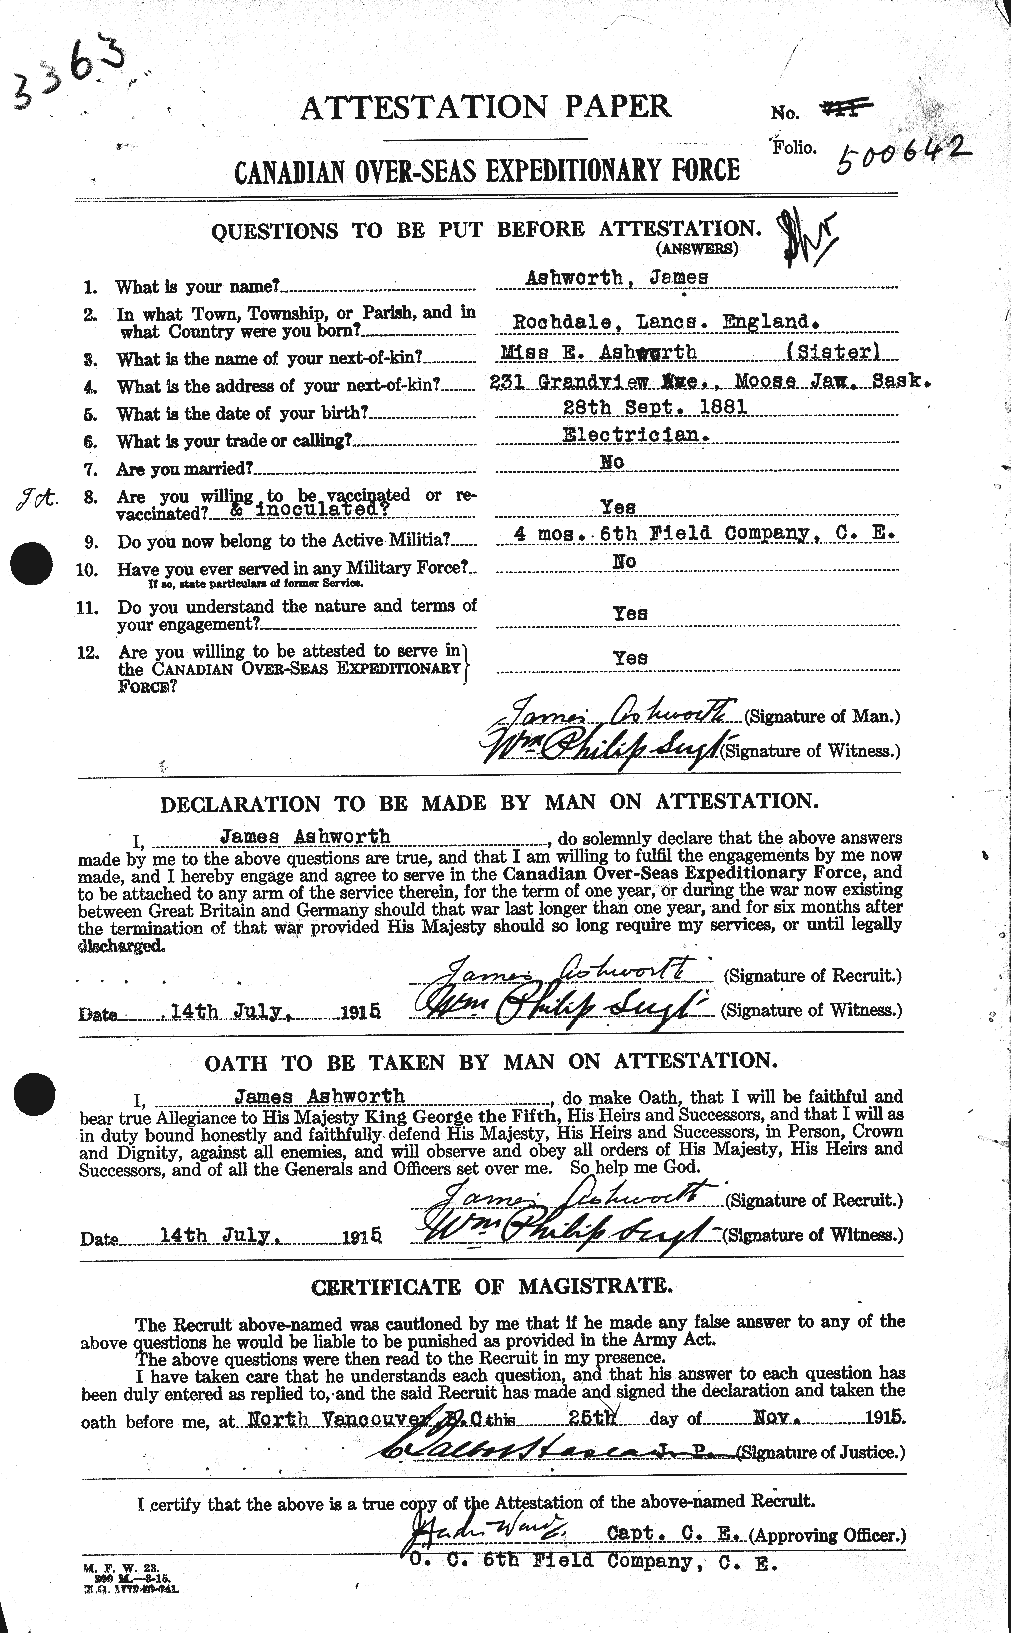 Personnel Records of the First World War - CEF 223724a